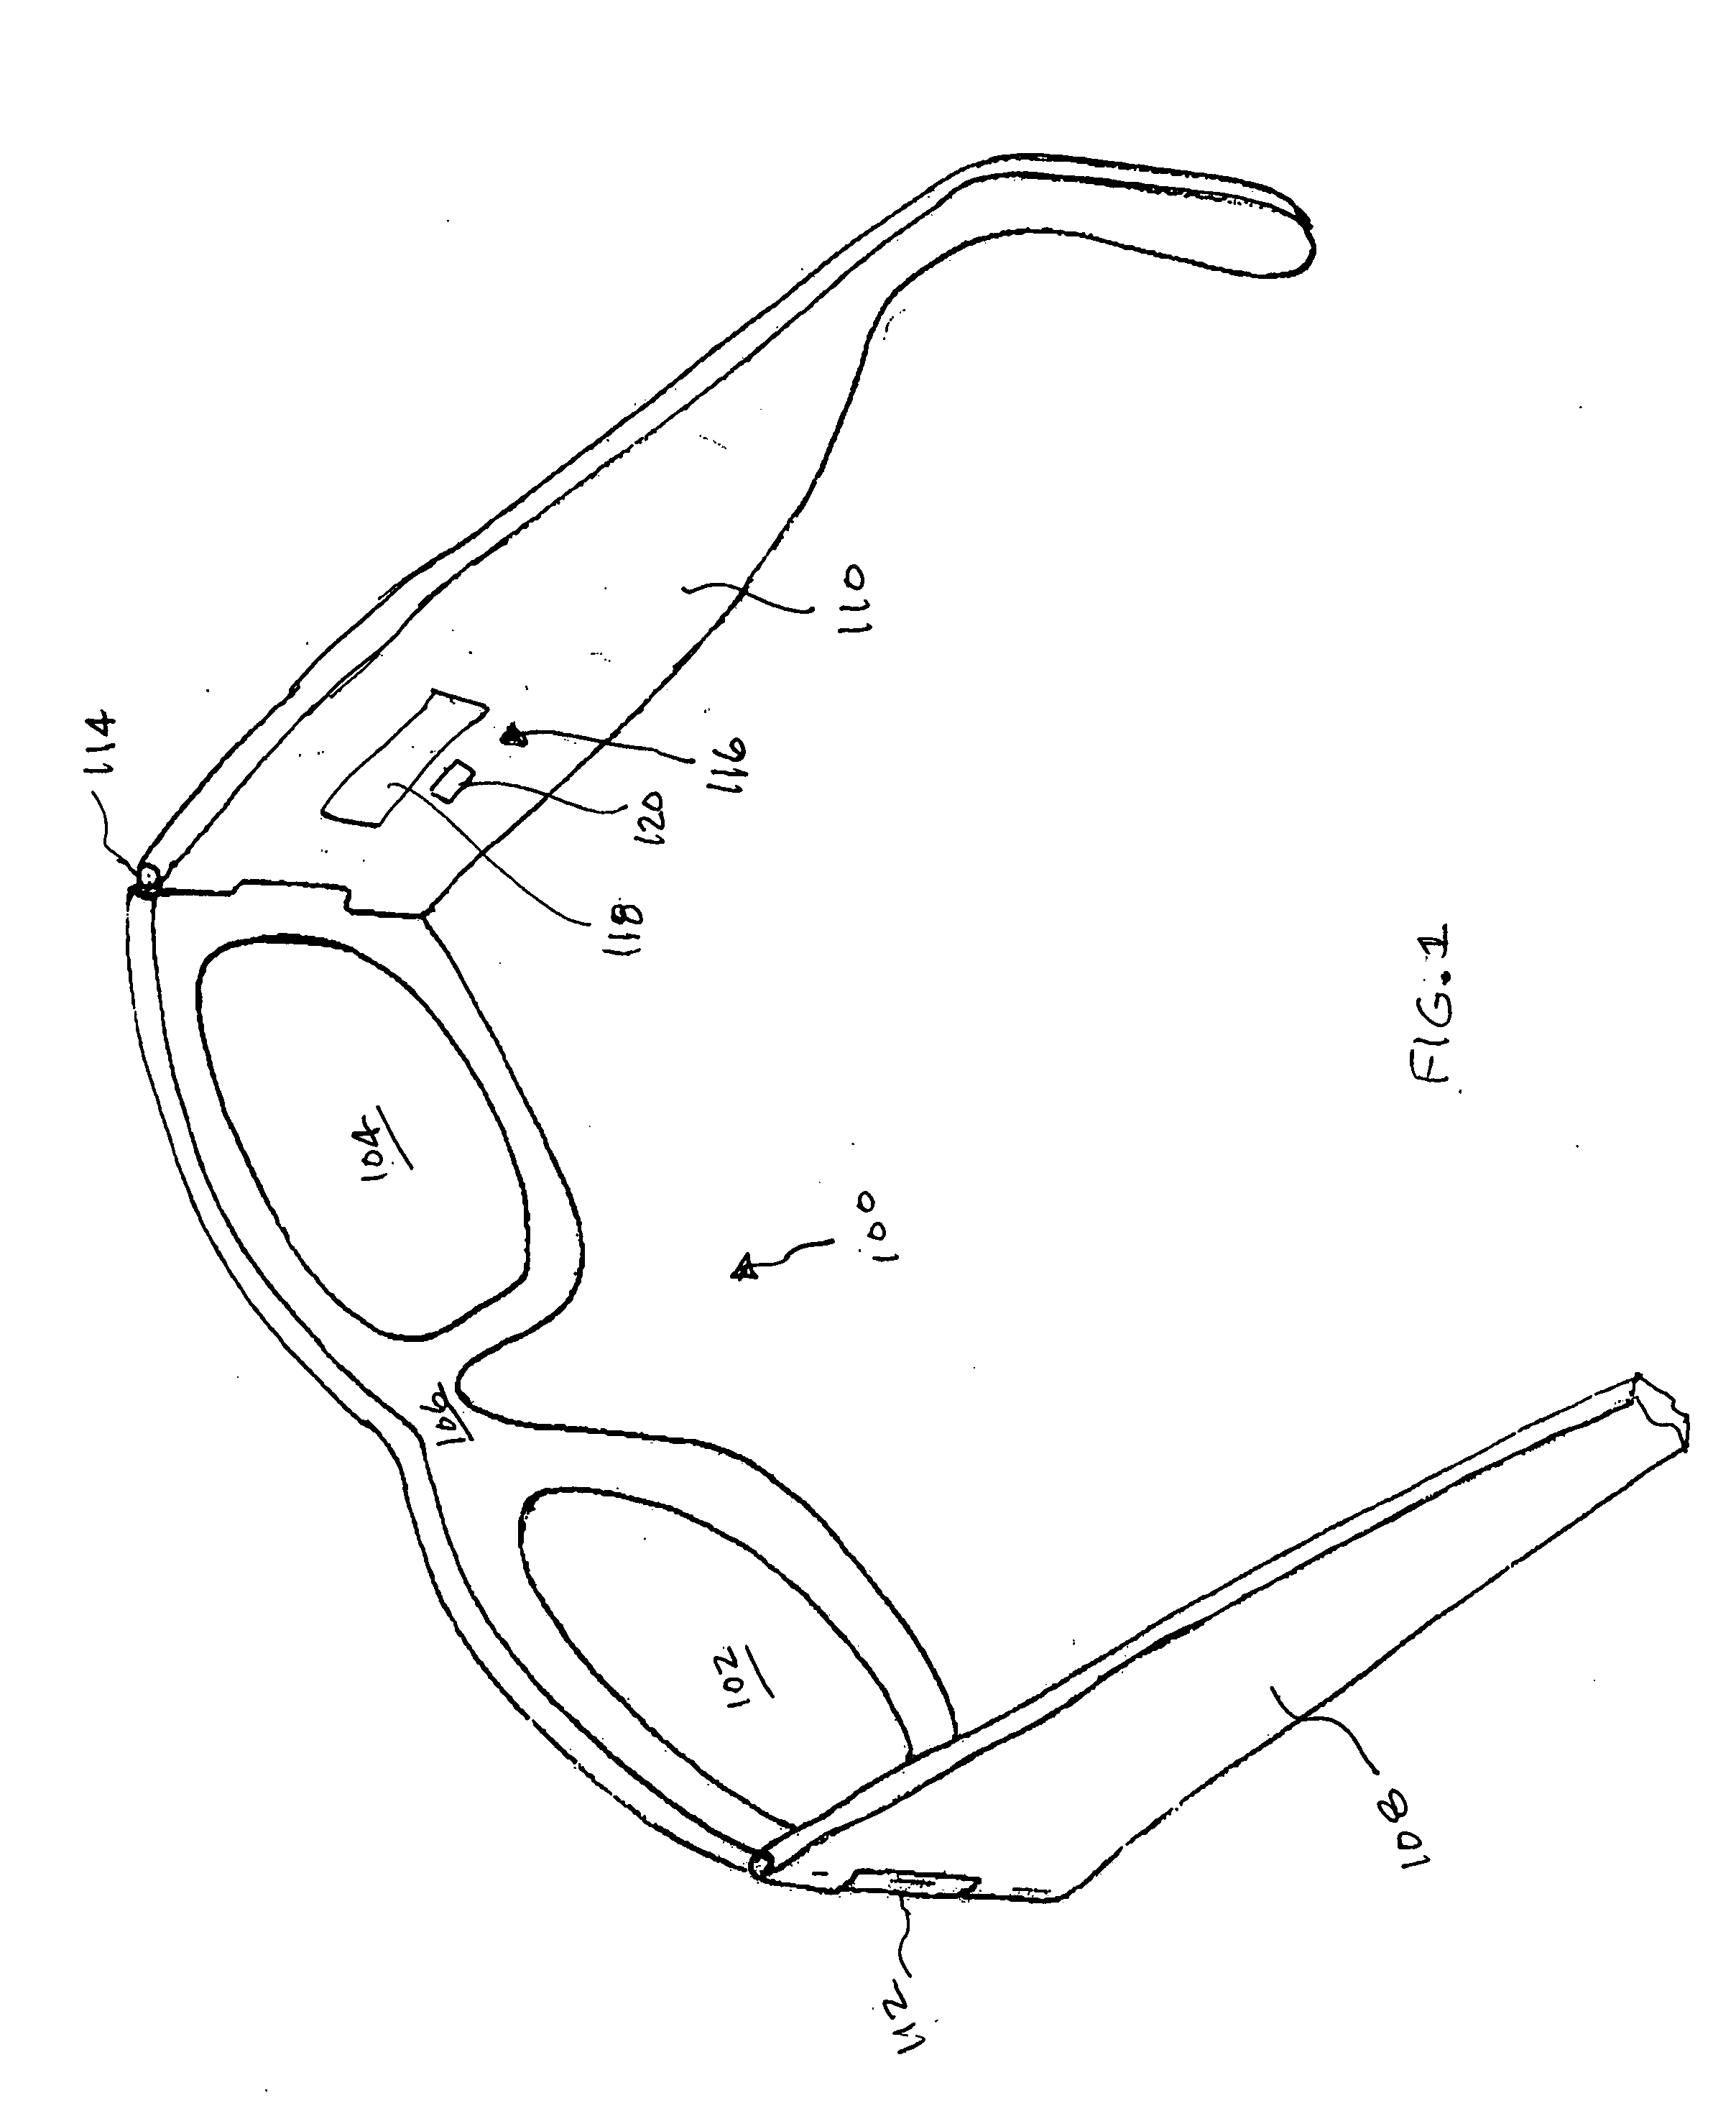 Eyeglasses with activity monitoring